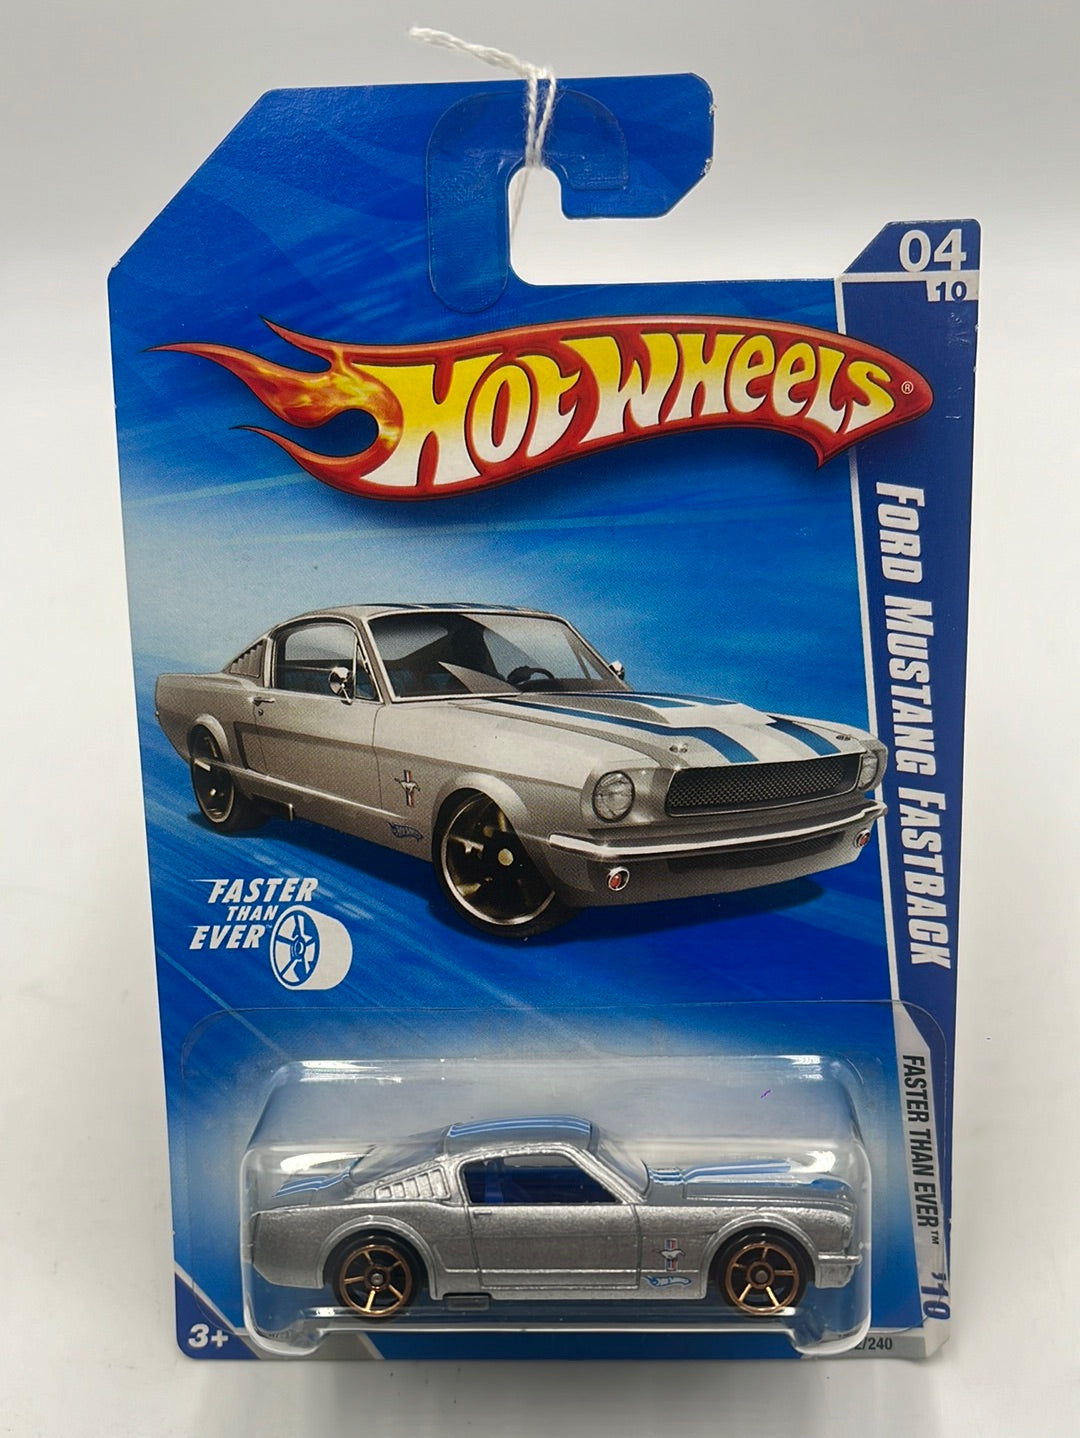 2010 Hot Wheels Faster Than Ever Ford Mustang Fastback Silver 132/240 26H